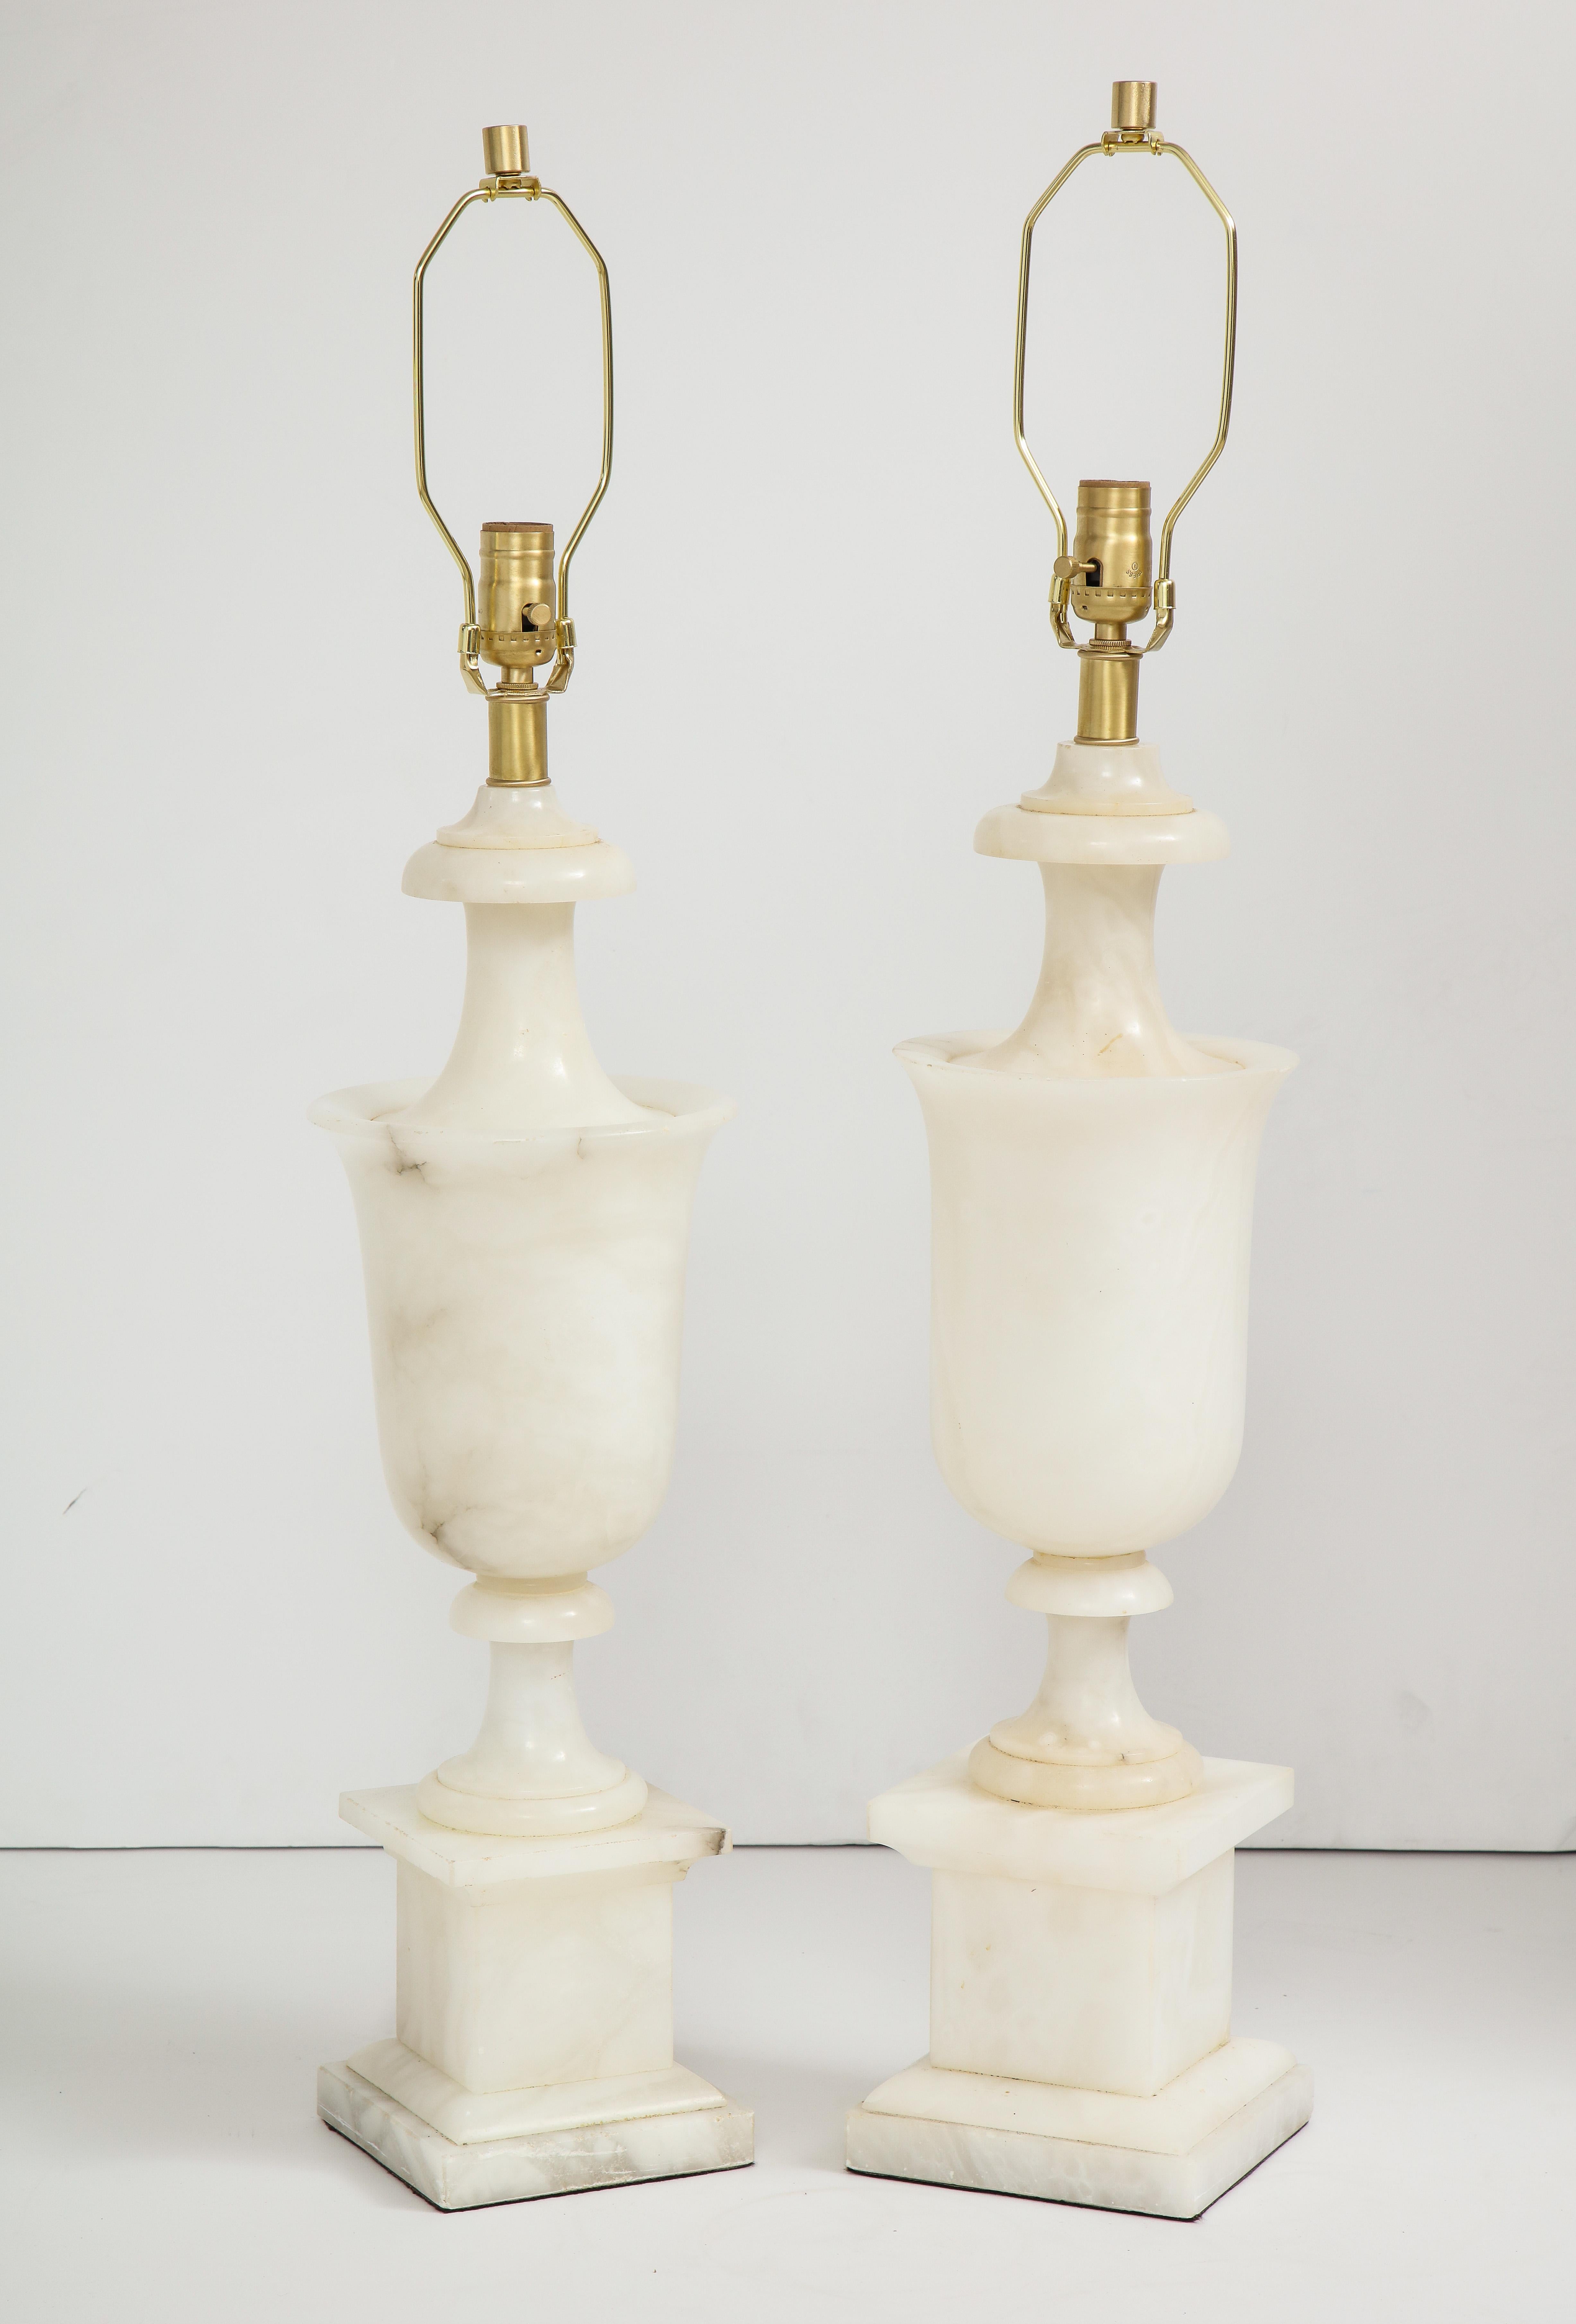 Italian neoclassical influenced handcrafted alabaster lamp features an urn shaped body resting on square platform base, all in a milky white alabaster with slight grey/gold veining. Rewired for use in the USA, 100W max bulb.

Only 1 available.